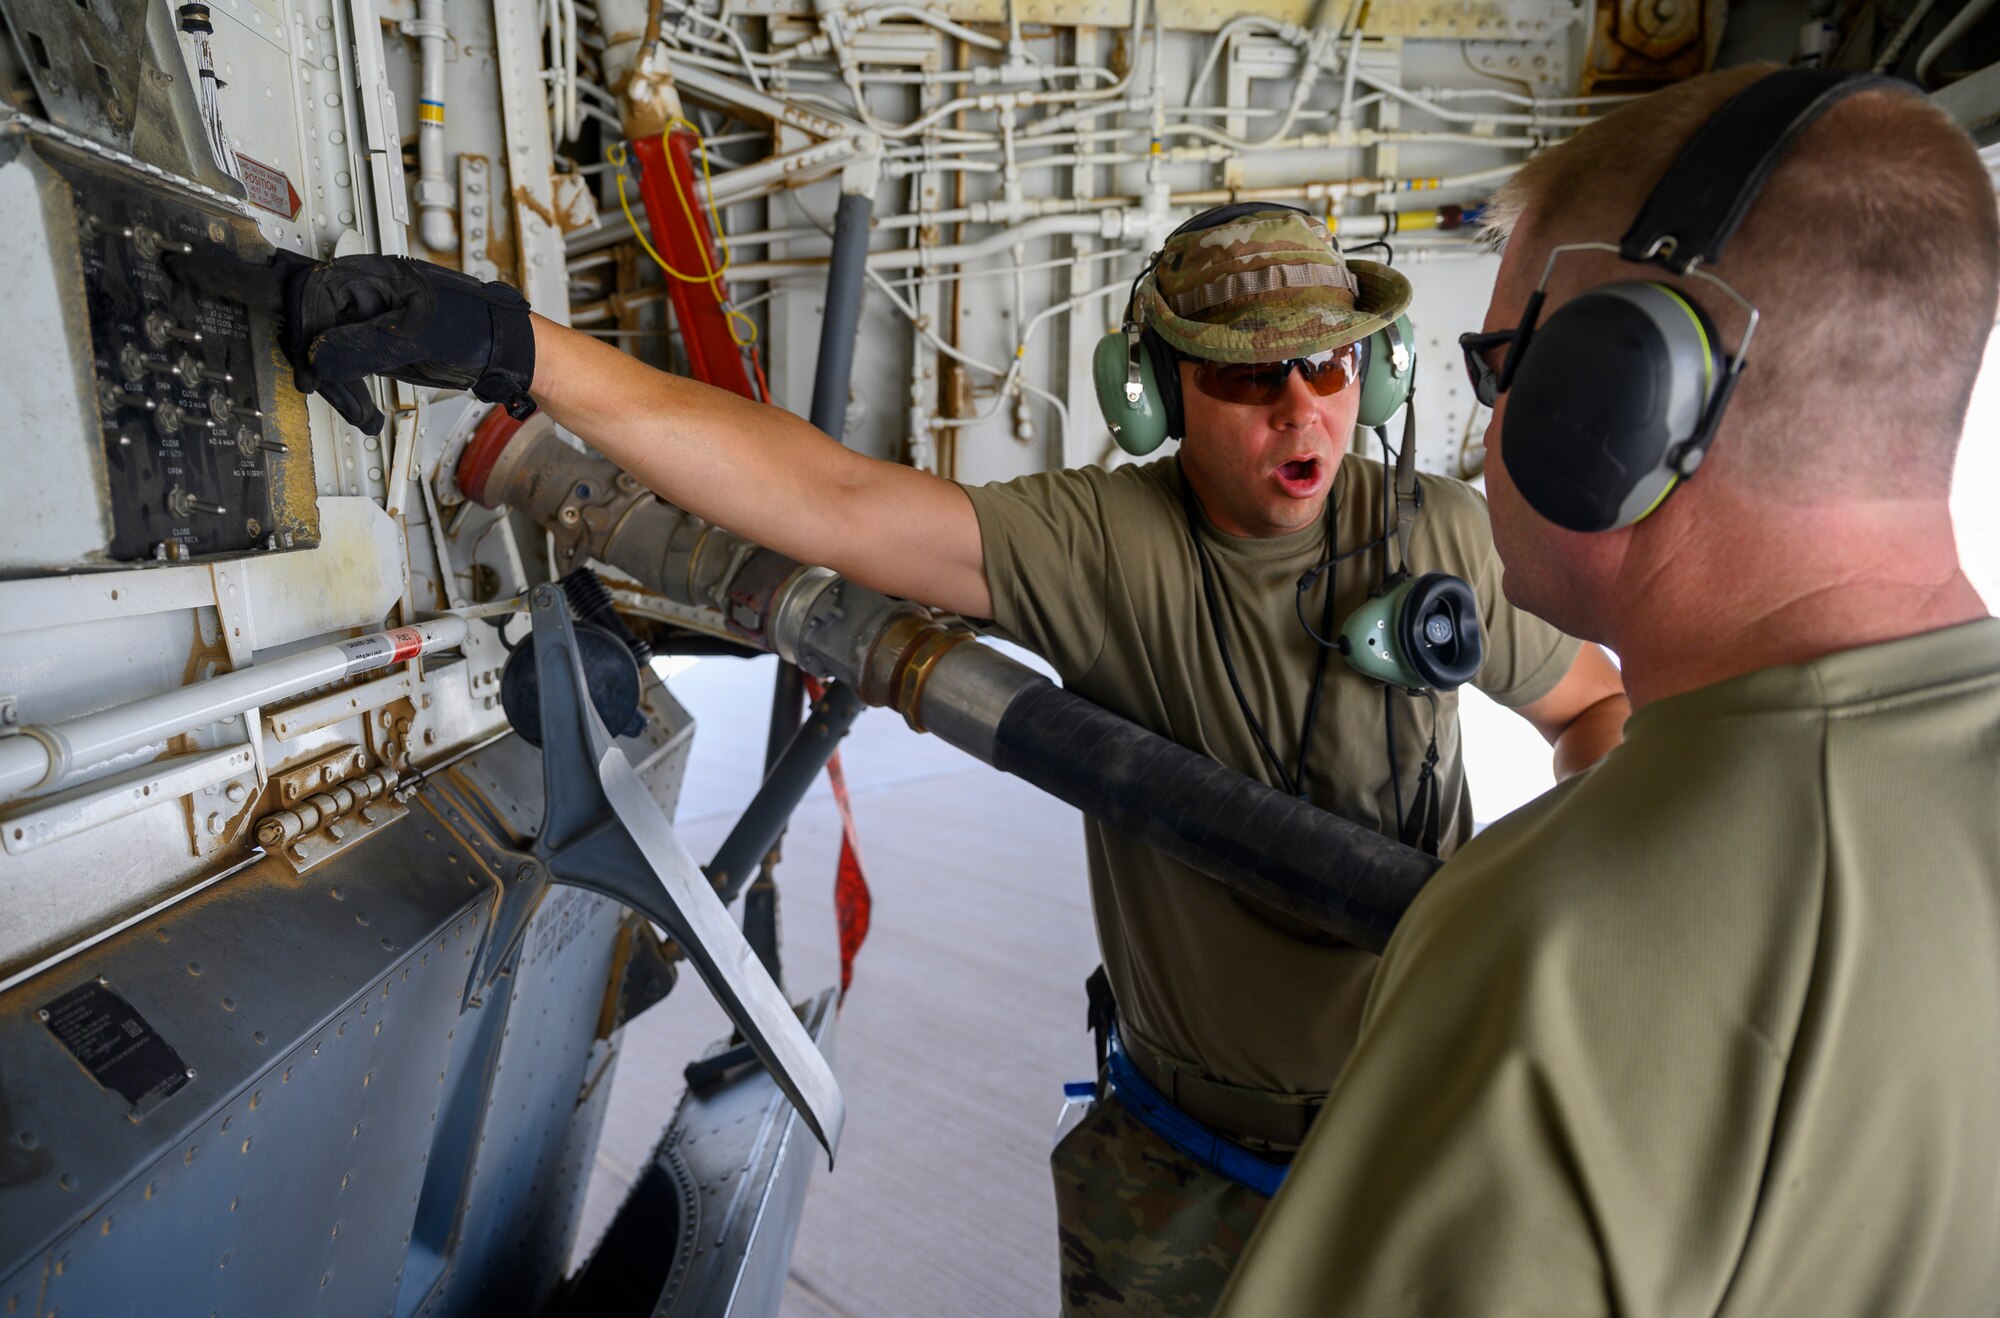 U.S. Air Force Tech. Sgt. Adam Barrett, 157th Expeditionary Fighter Generation Squadron dedicated crew chief, explains part of the hot pit refueling process on a U.S. Air Force KC-135 Stratotanker, Prince Sultan Air Base, June 25, 2021. This event demonstrated the success of several weeks of hot-pit refueling cross-airframe training between 378th and 379th Air Expeditionary Wing maintainers, expanding both wings ability to provide agile support for theater operations. (U.S. Air Force photo by Senior Airman Samuel Earick)